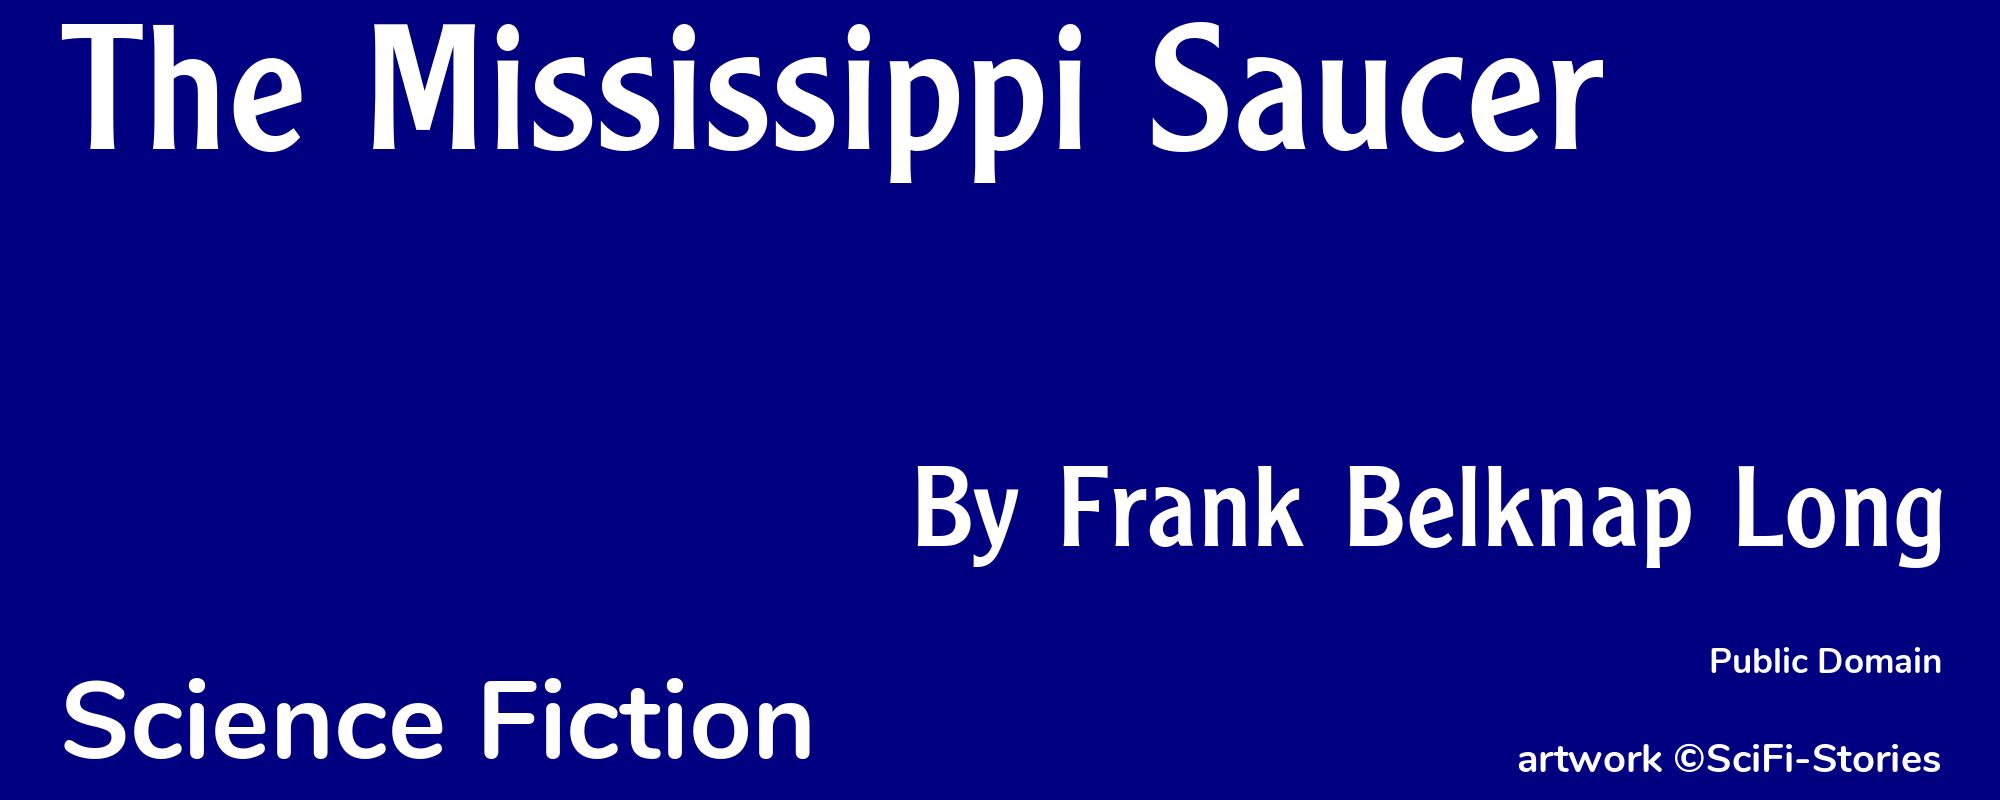 The Mississippi Saucer - Cover